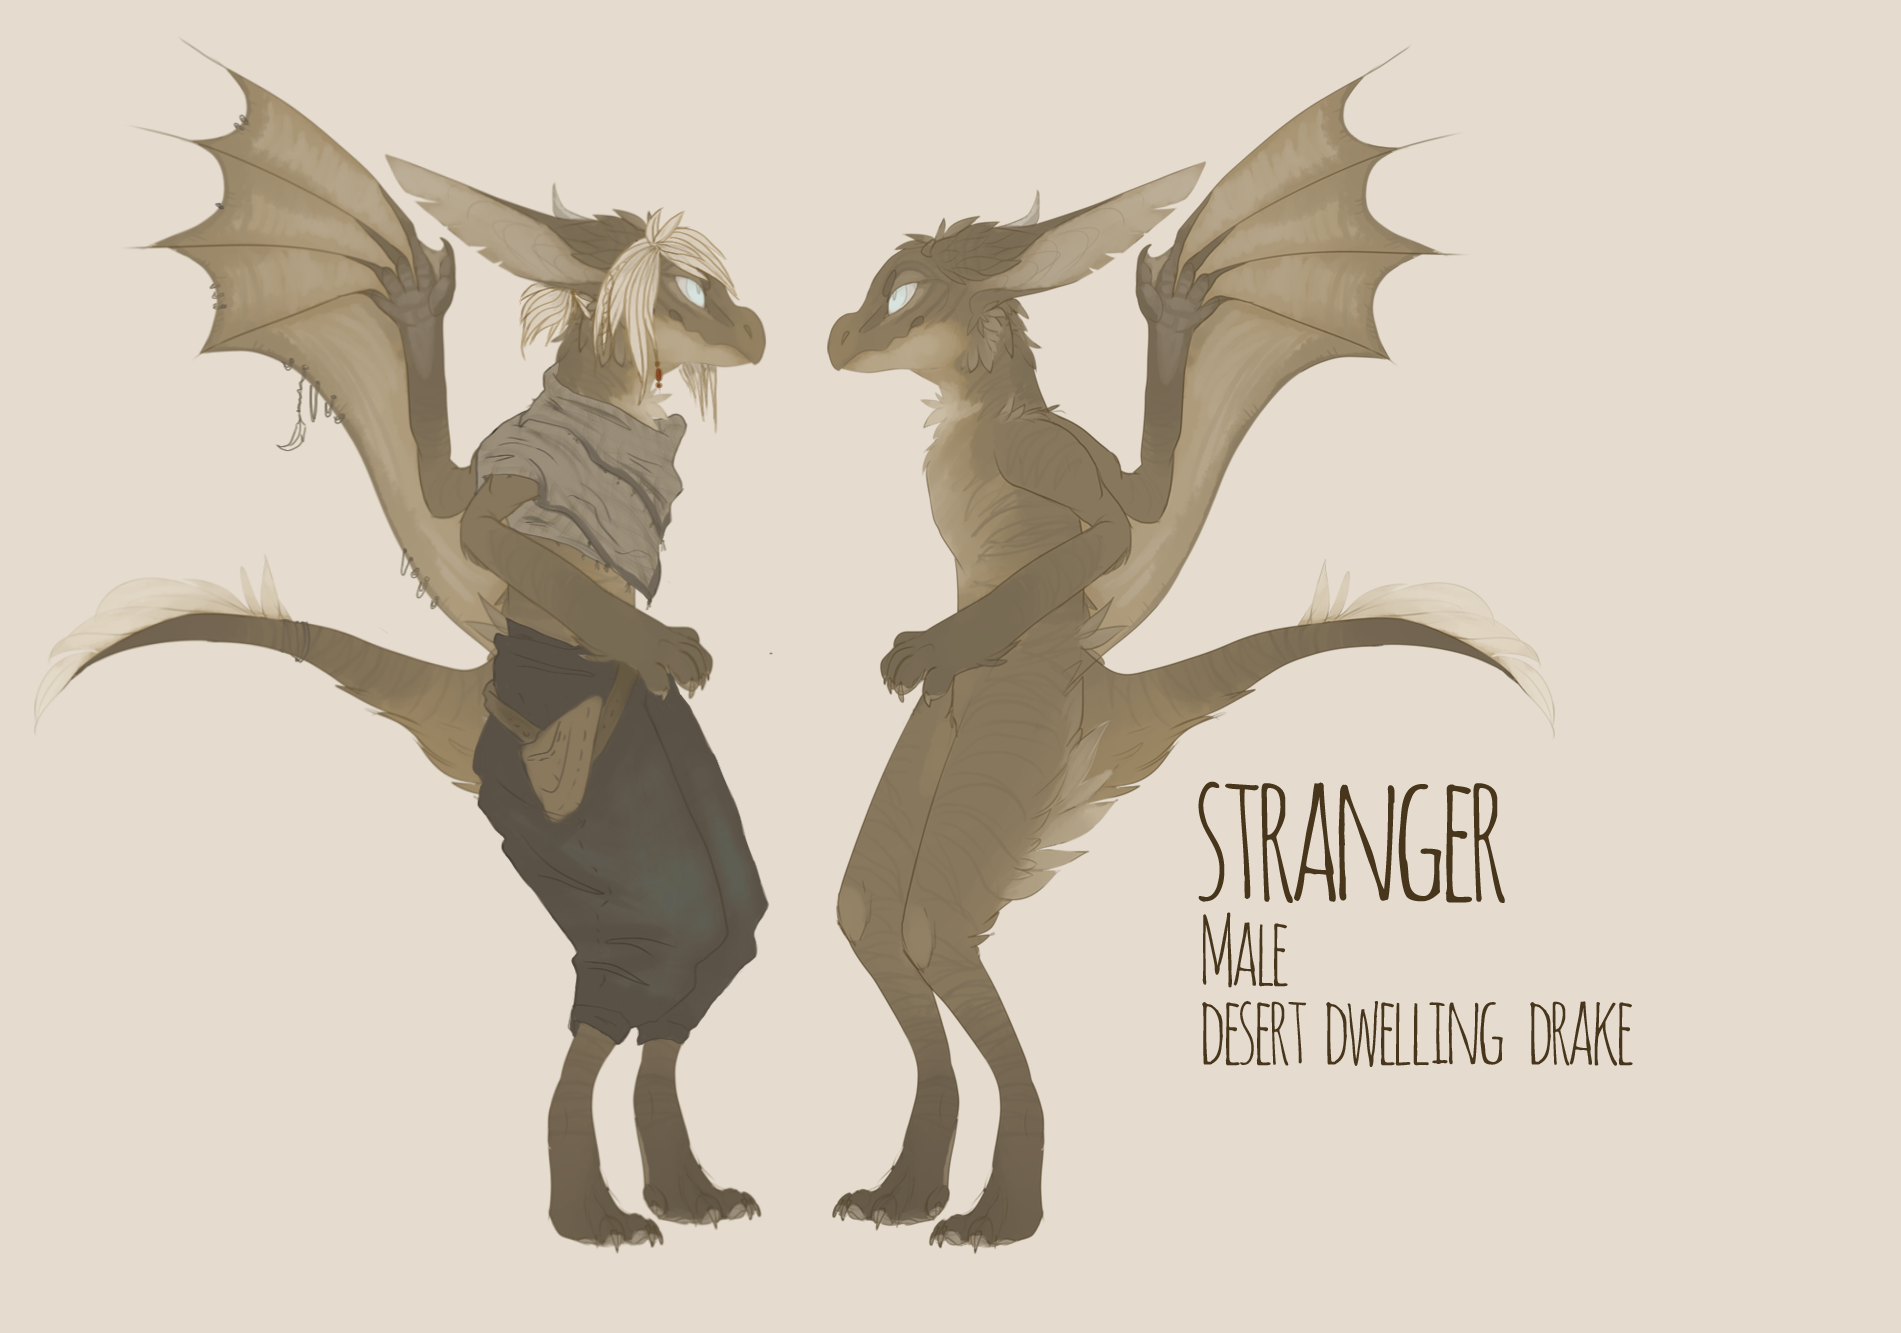 stranger_ref_by_meekor-dacfgax.png